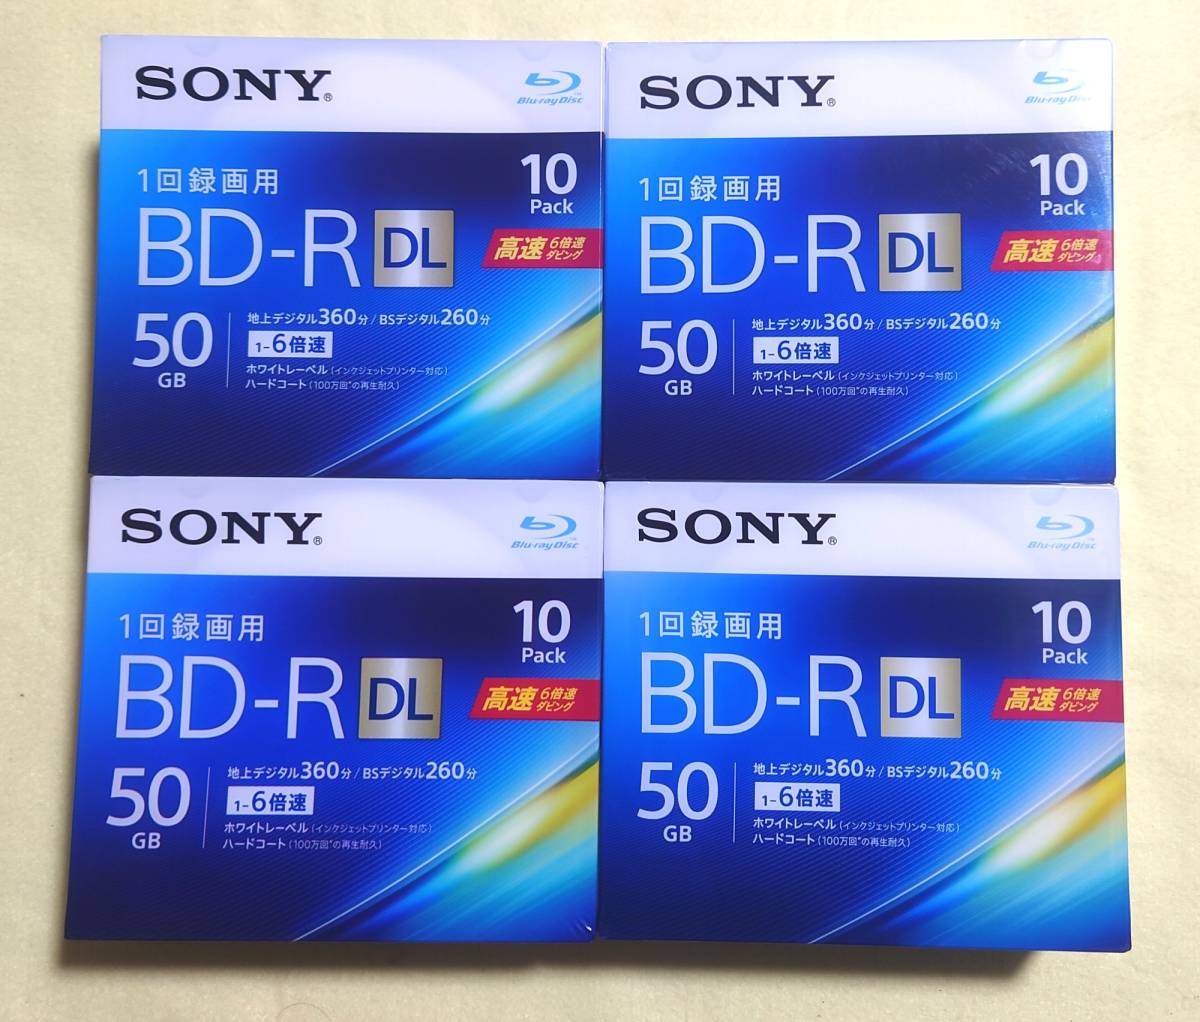 # new goods SONY Blue-ray disk video recording for 6 speed BD-R DL 50GB 40 sheets 